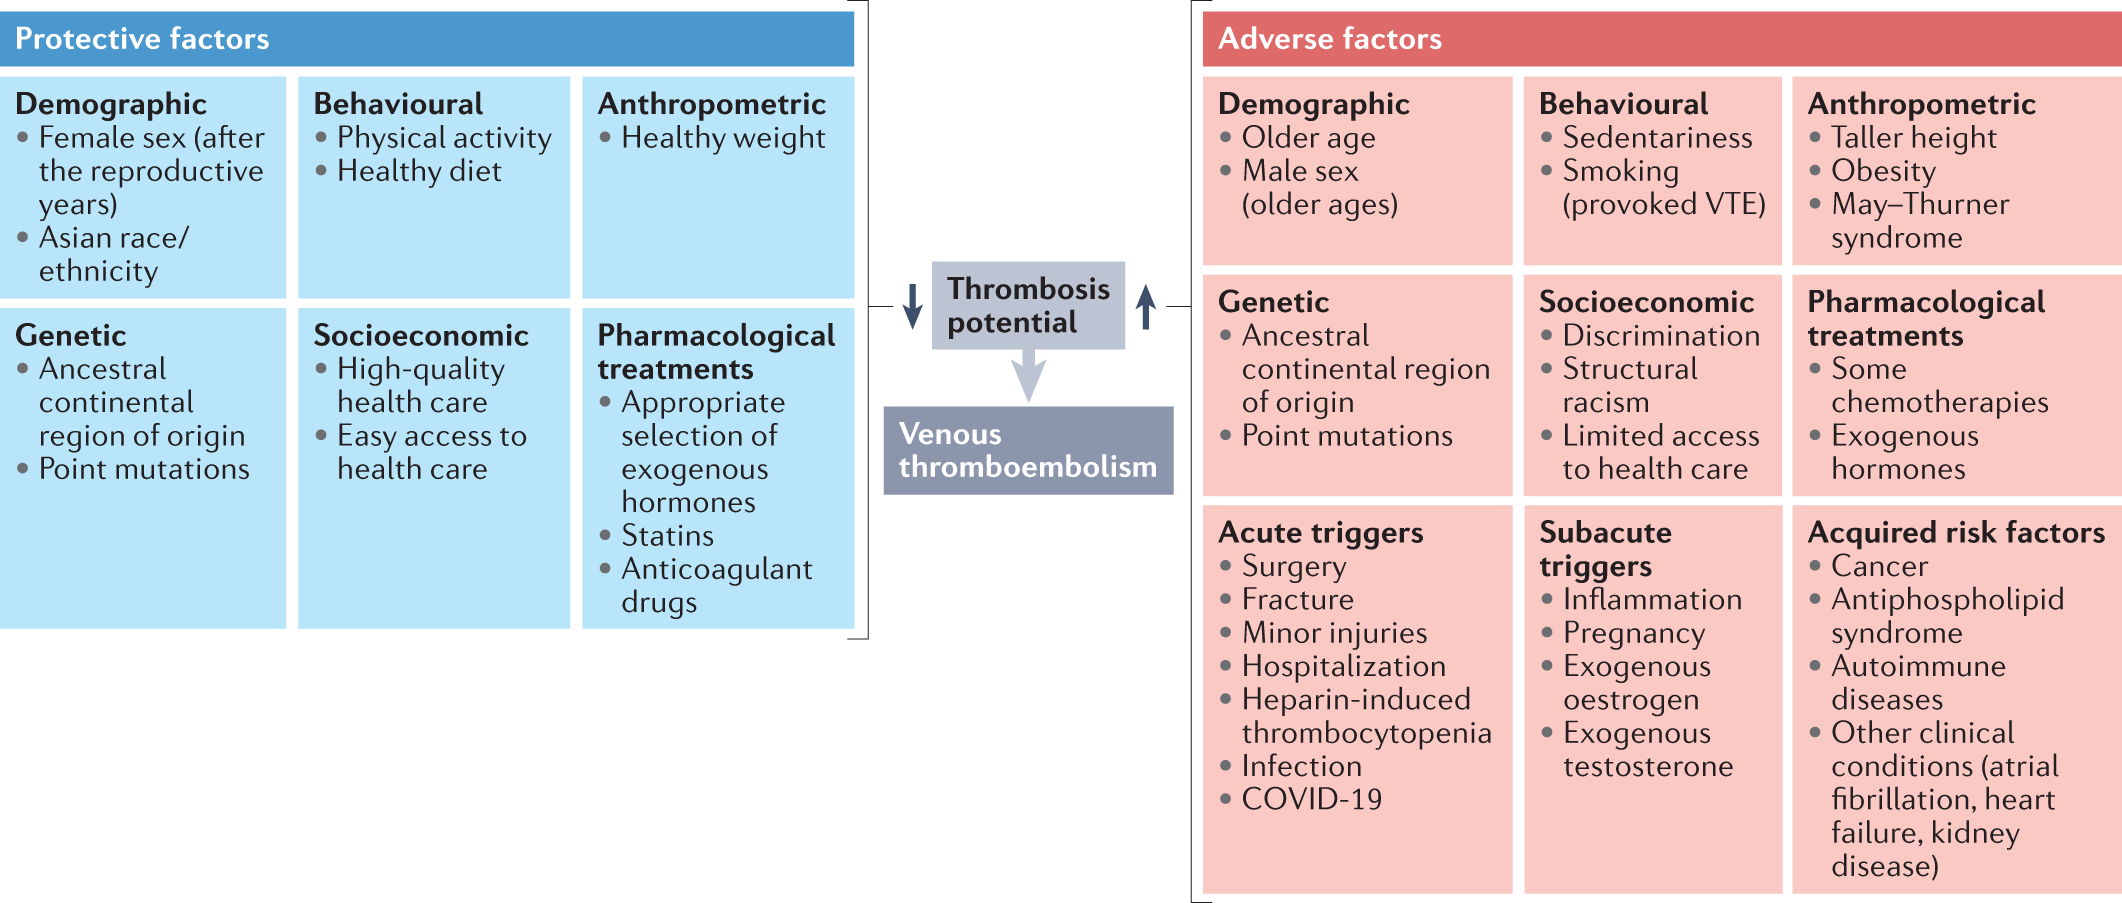 Epidemiology and prevention of venous thromboembolism